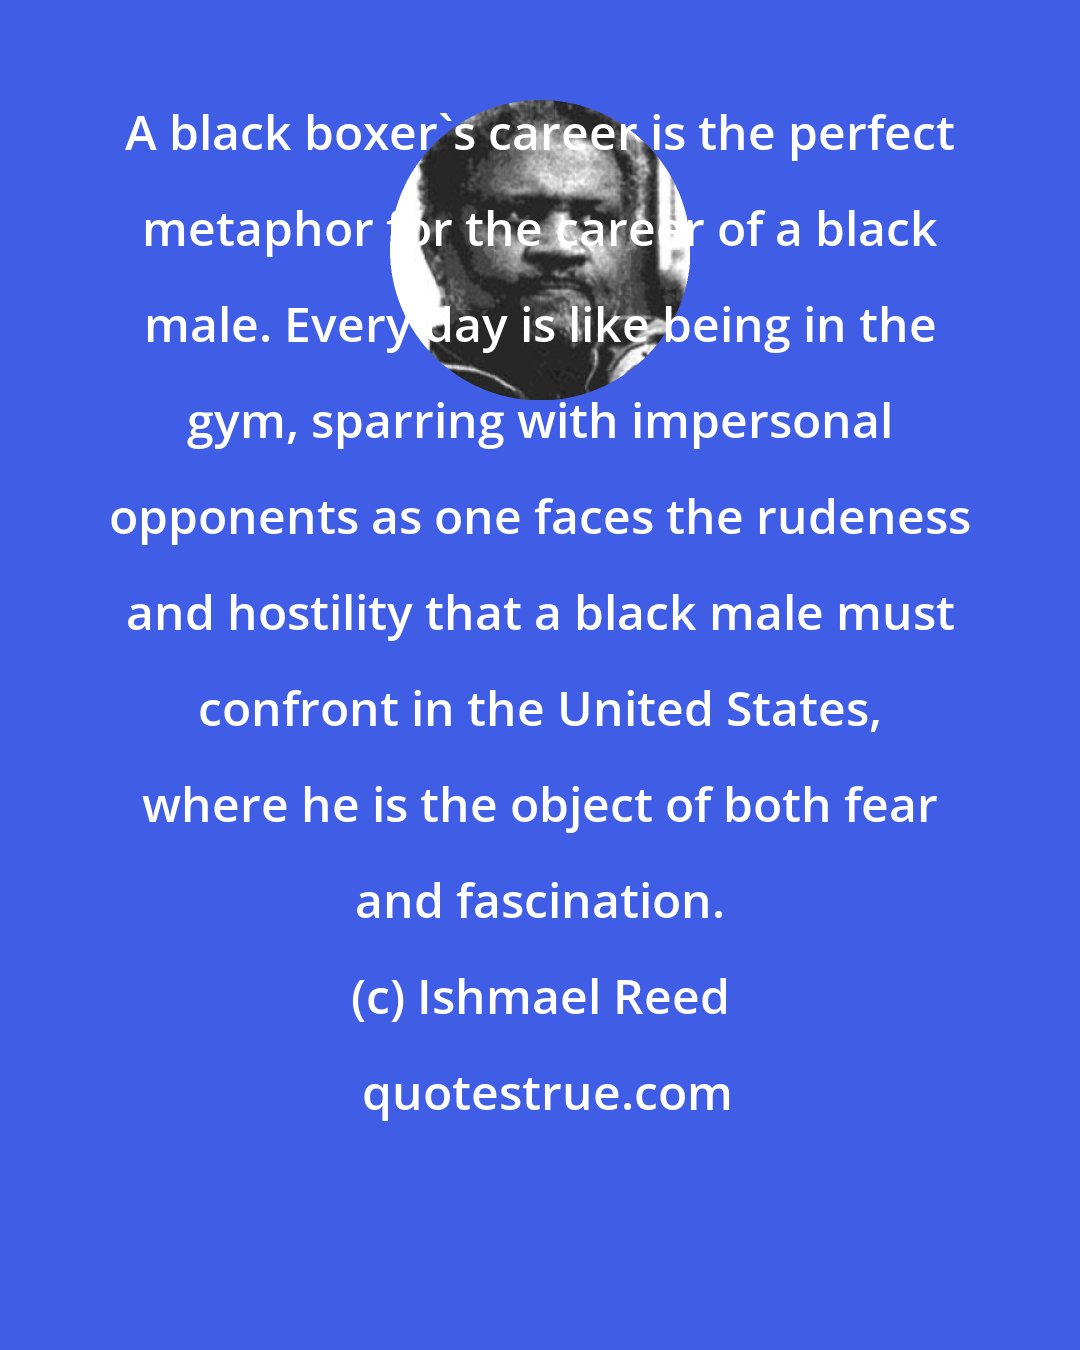 Ishmael Reed: A black boxer's career is the perfect metaphor for the career of a black male. Every day is like being in the gym, sparring with impersonal opponents as one faces the rudeness and hostility that a black male must confront in the United States, where he is the object of both fear and fascination.